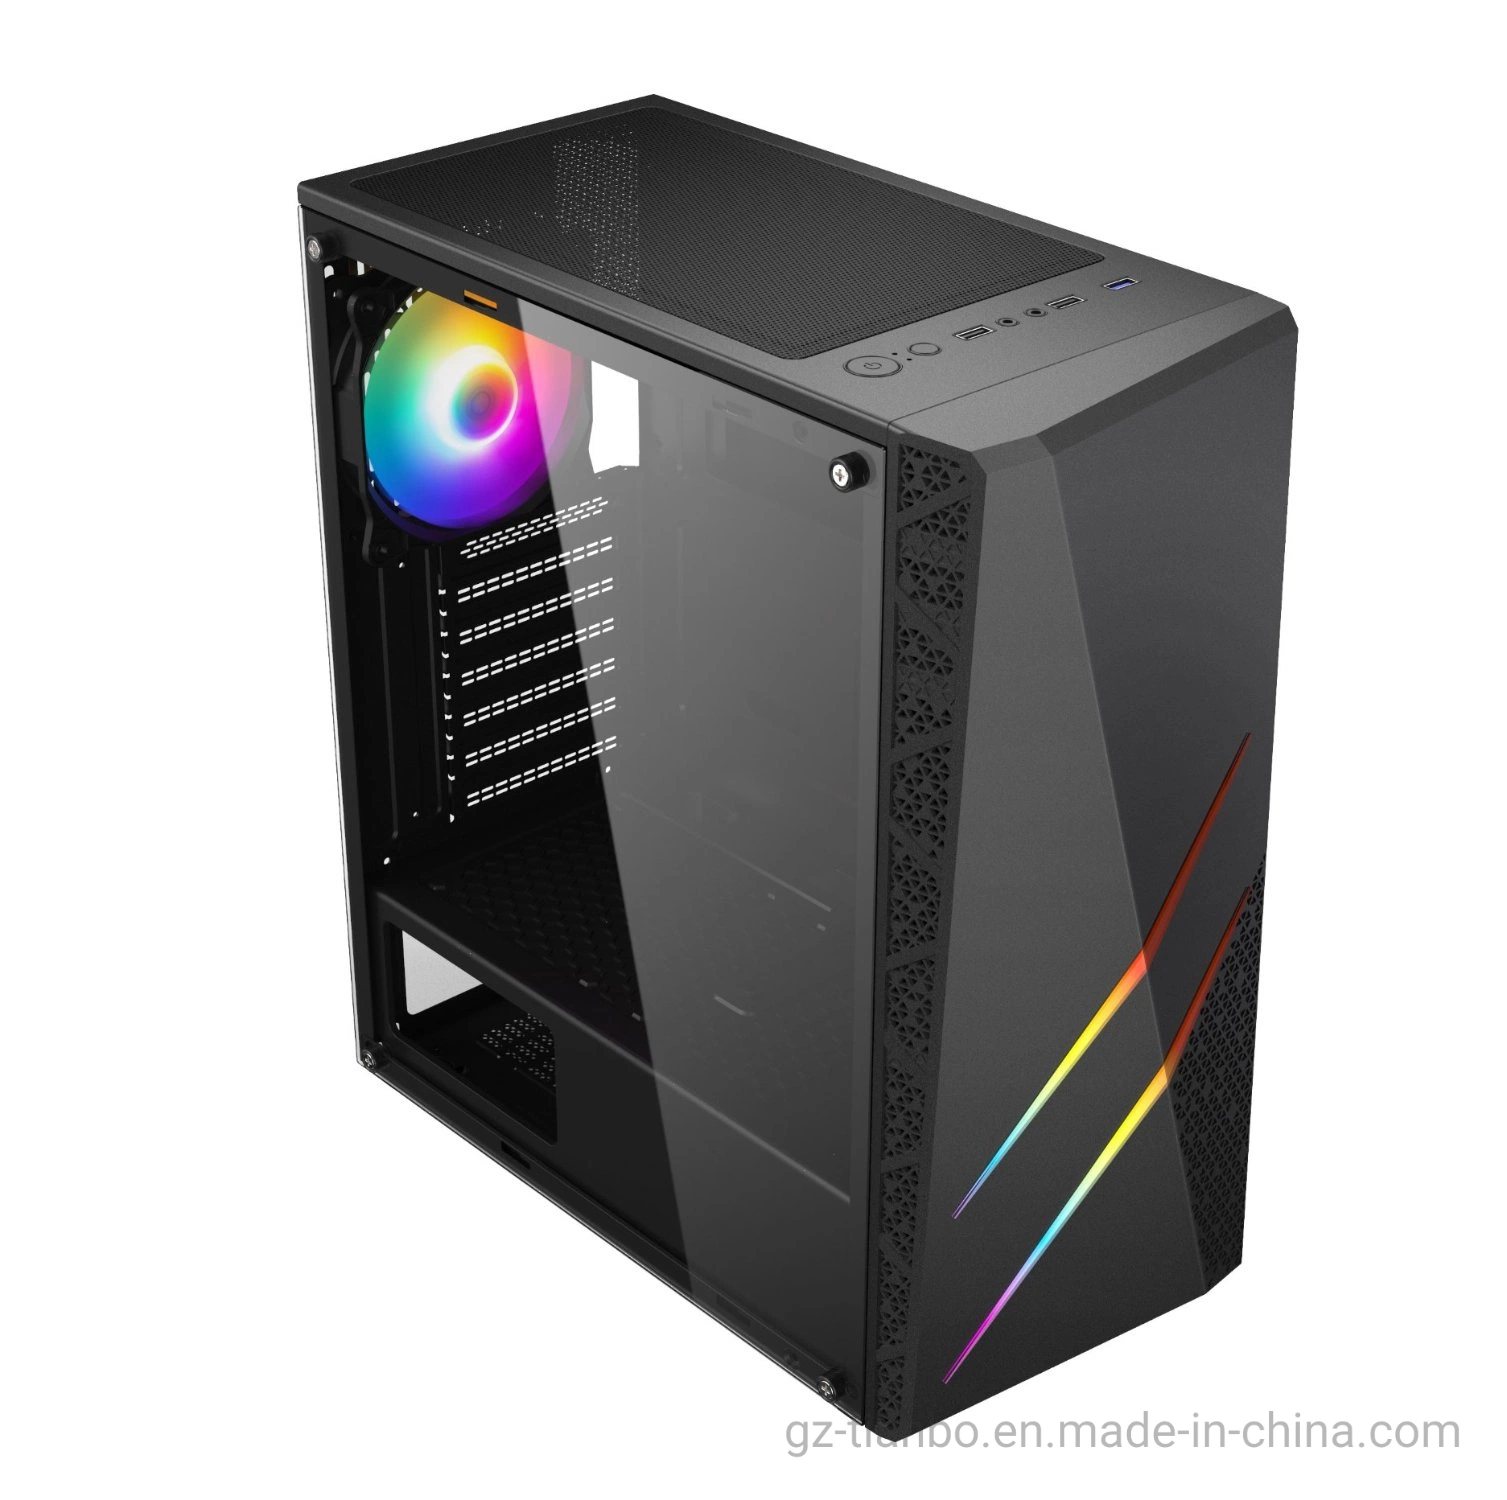 RGB Fans Gaming Hot Sale ATX Gaming Case Computer Parts Computer PC Case with Great Tempered Glass Design G50 Model